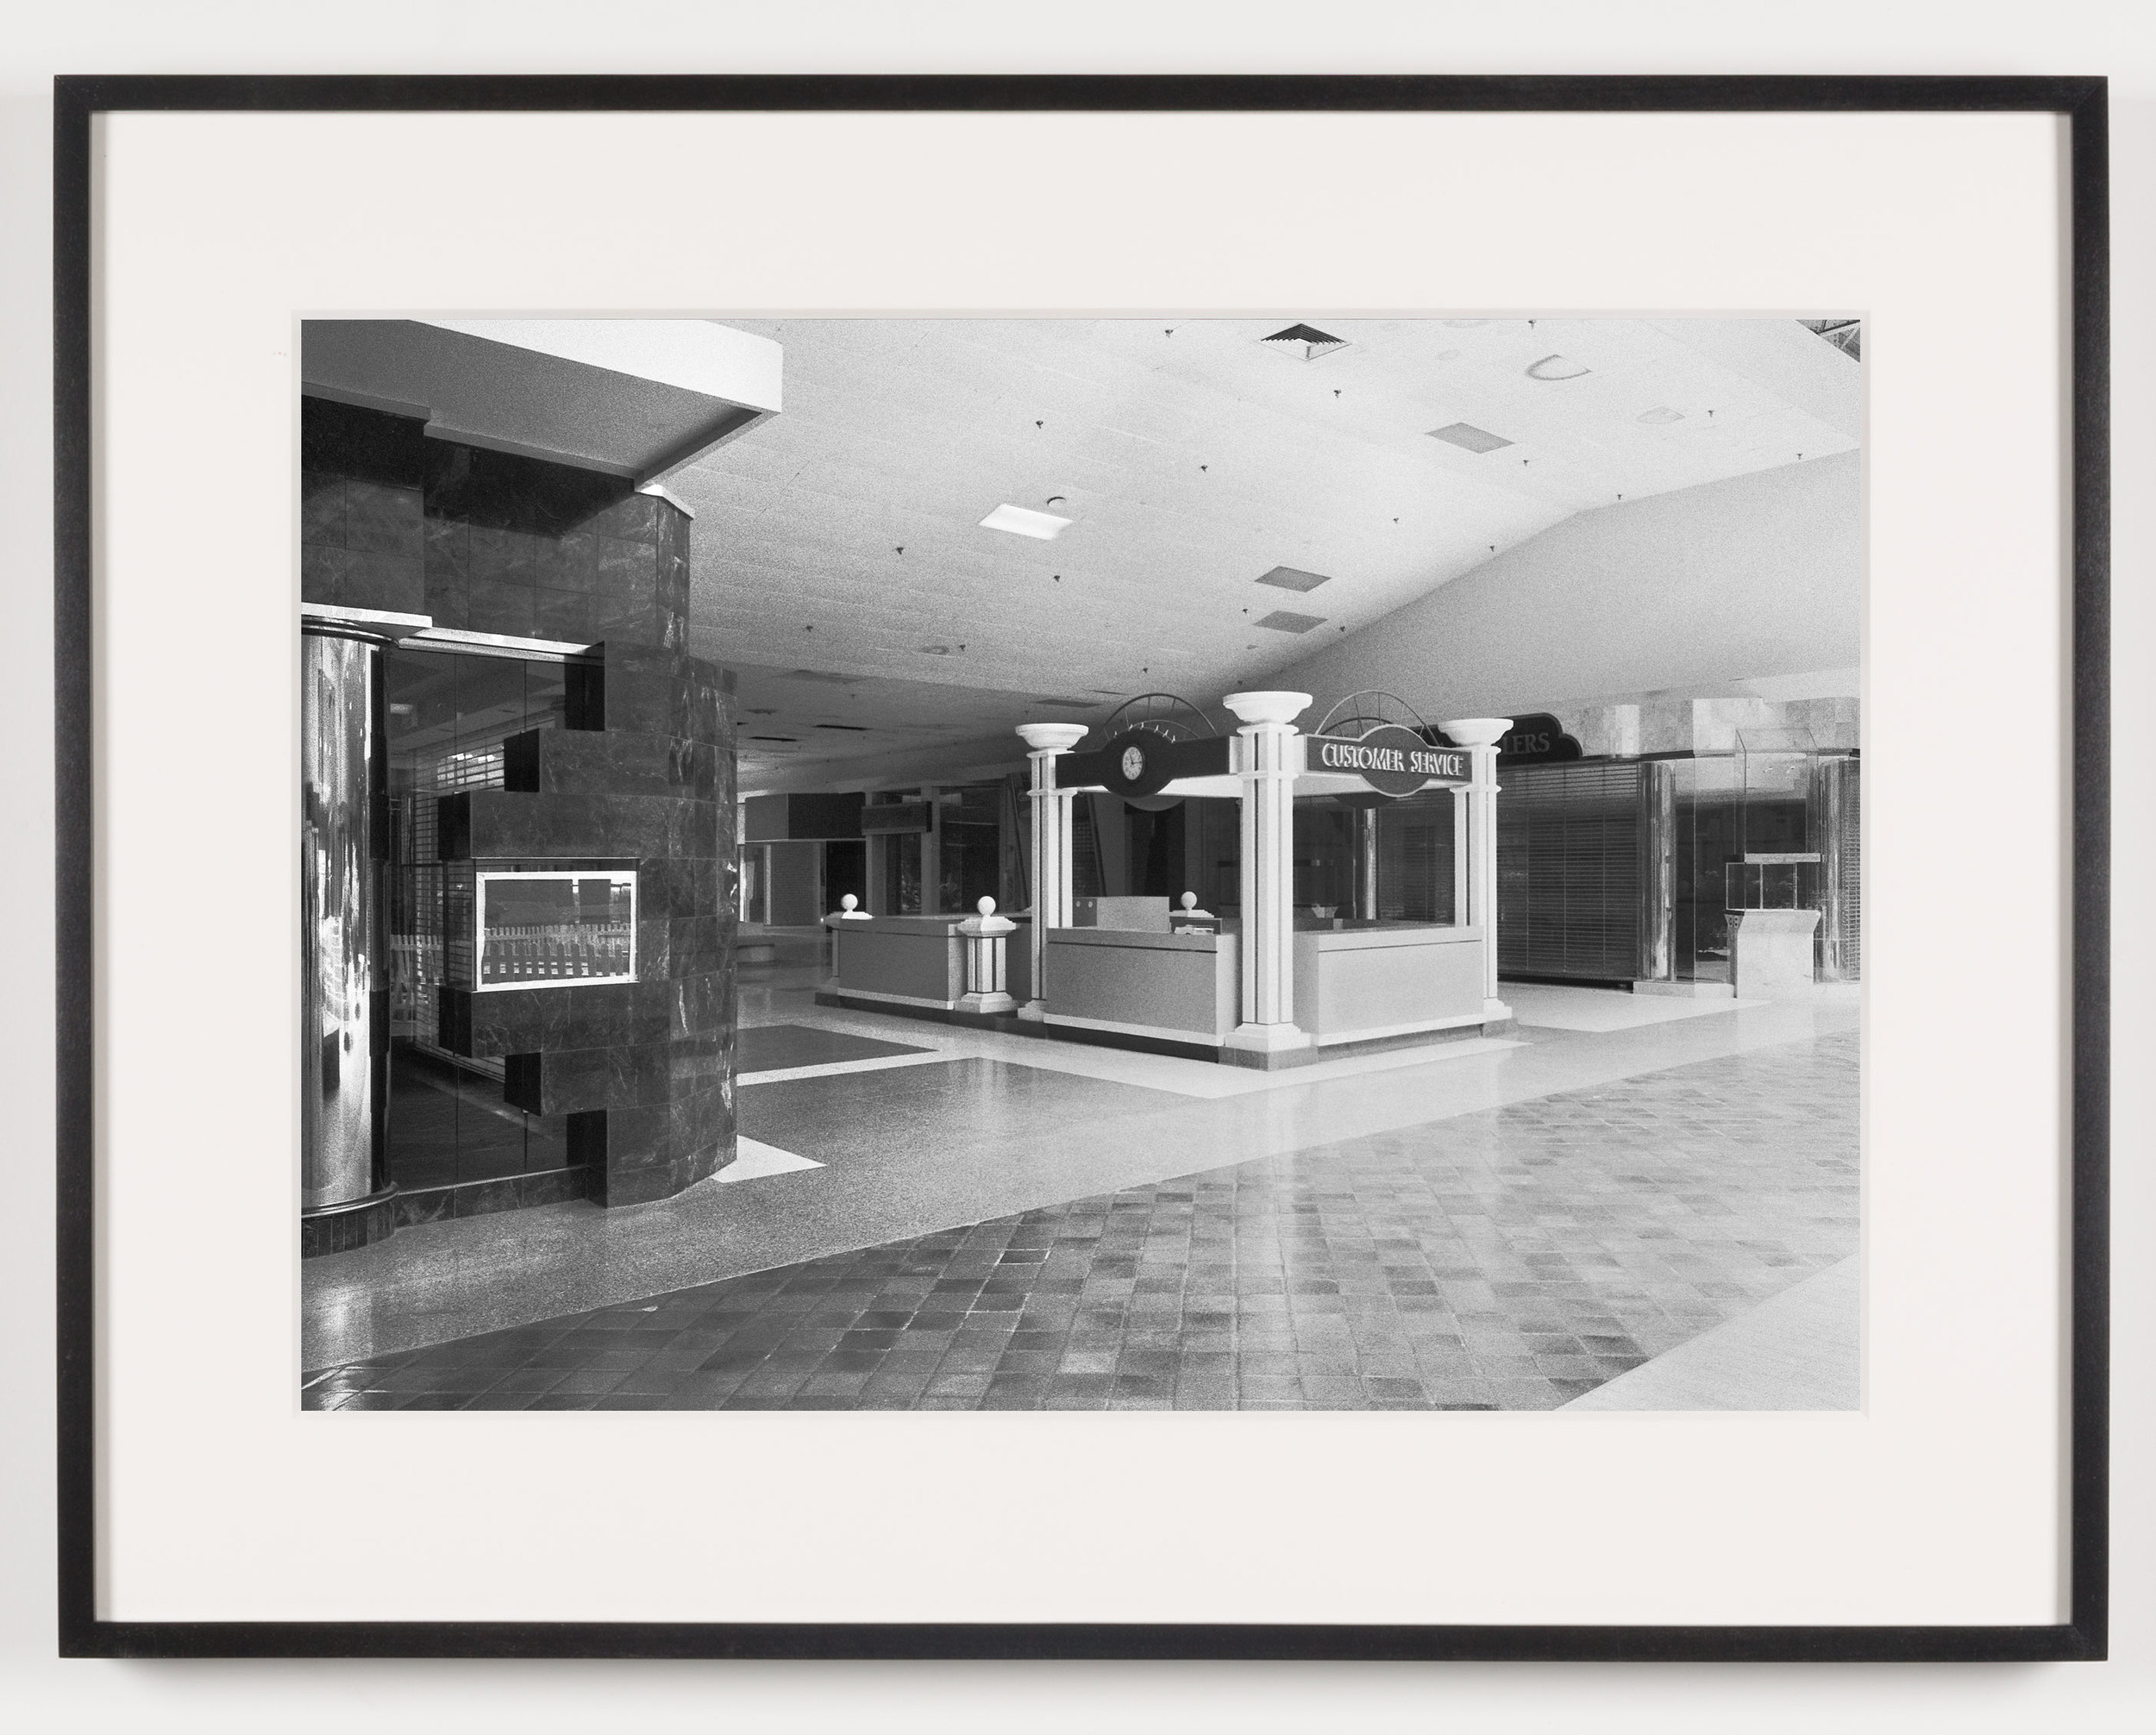   Rolling Acres Mall (View of Customer Service Kiosk), Akron, OH, Est. 1975    2011   Epson Ultrachrome K3 archival ink jet print on Hahnemühle Photo Rag paper  21 5/8 x 28 1/8 inches   American Passages, 2001–2011     